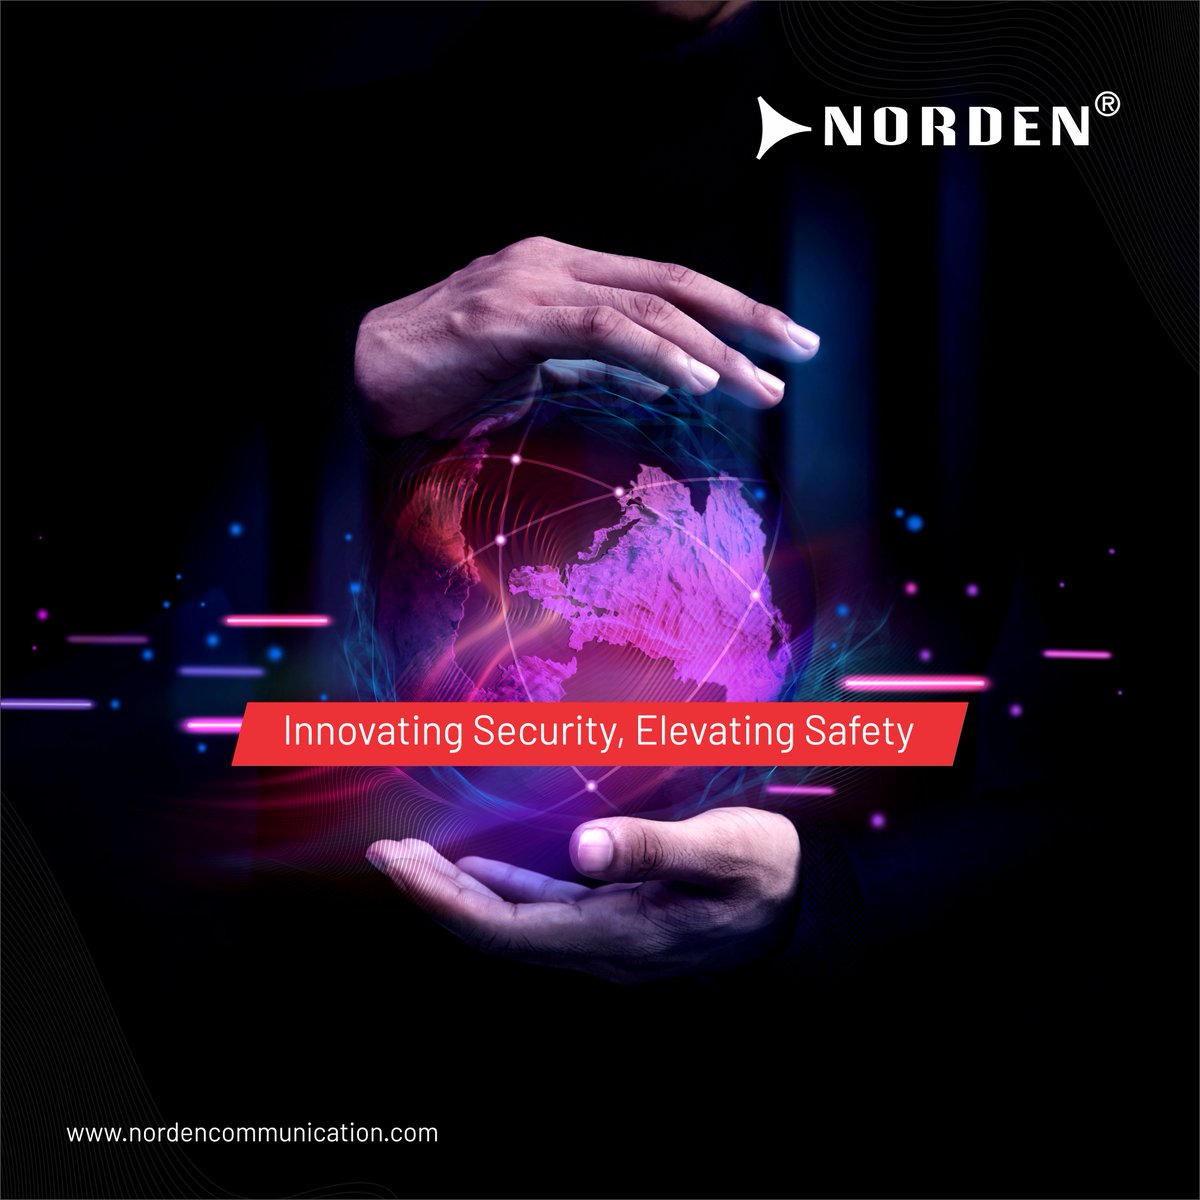 Protect what matters most with Norden – where innovation meets reliability. Norden's  unwavering commitment to excellence redefine the standards of security and surveillance. Experience Norden's innovation with NextGen solutions. 
#NordenCommunication #InnovatingSecurity